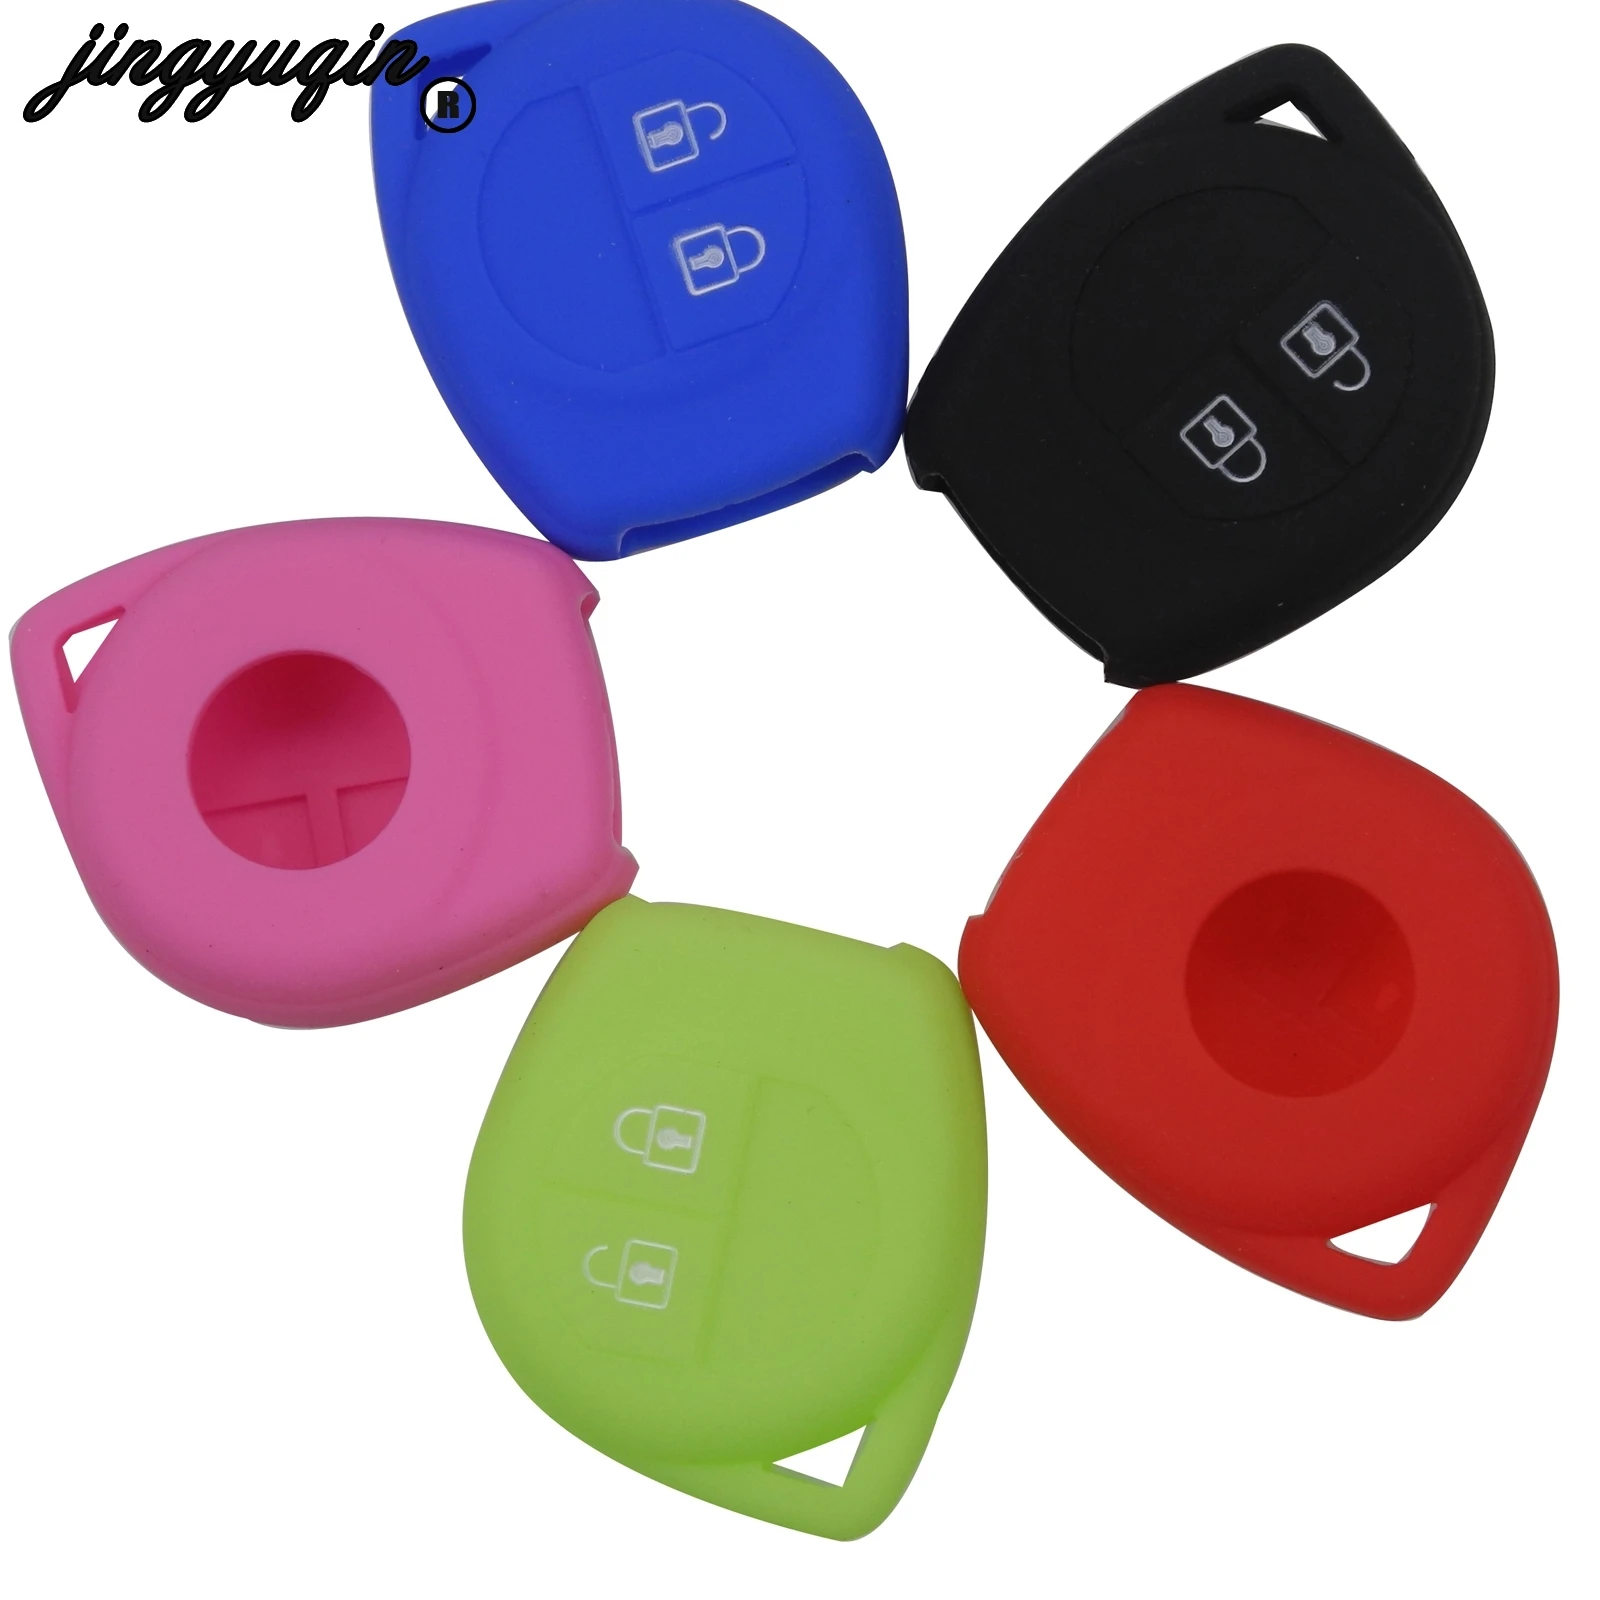 

jingyuqin Silicone 2 Buttons Remote Car Key Case Fob Protect Cover For Suzuki SX4 Swift Vitara Car Styling Holder